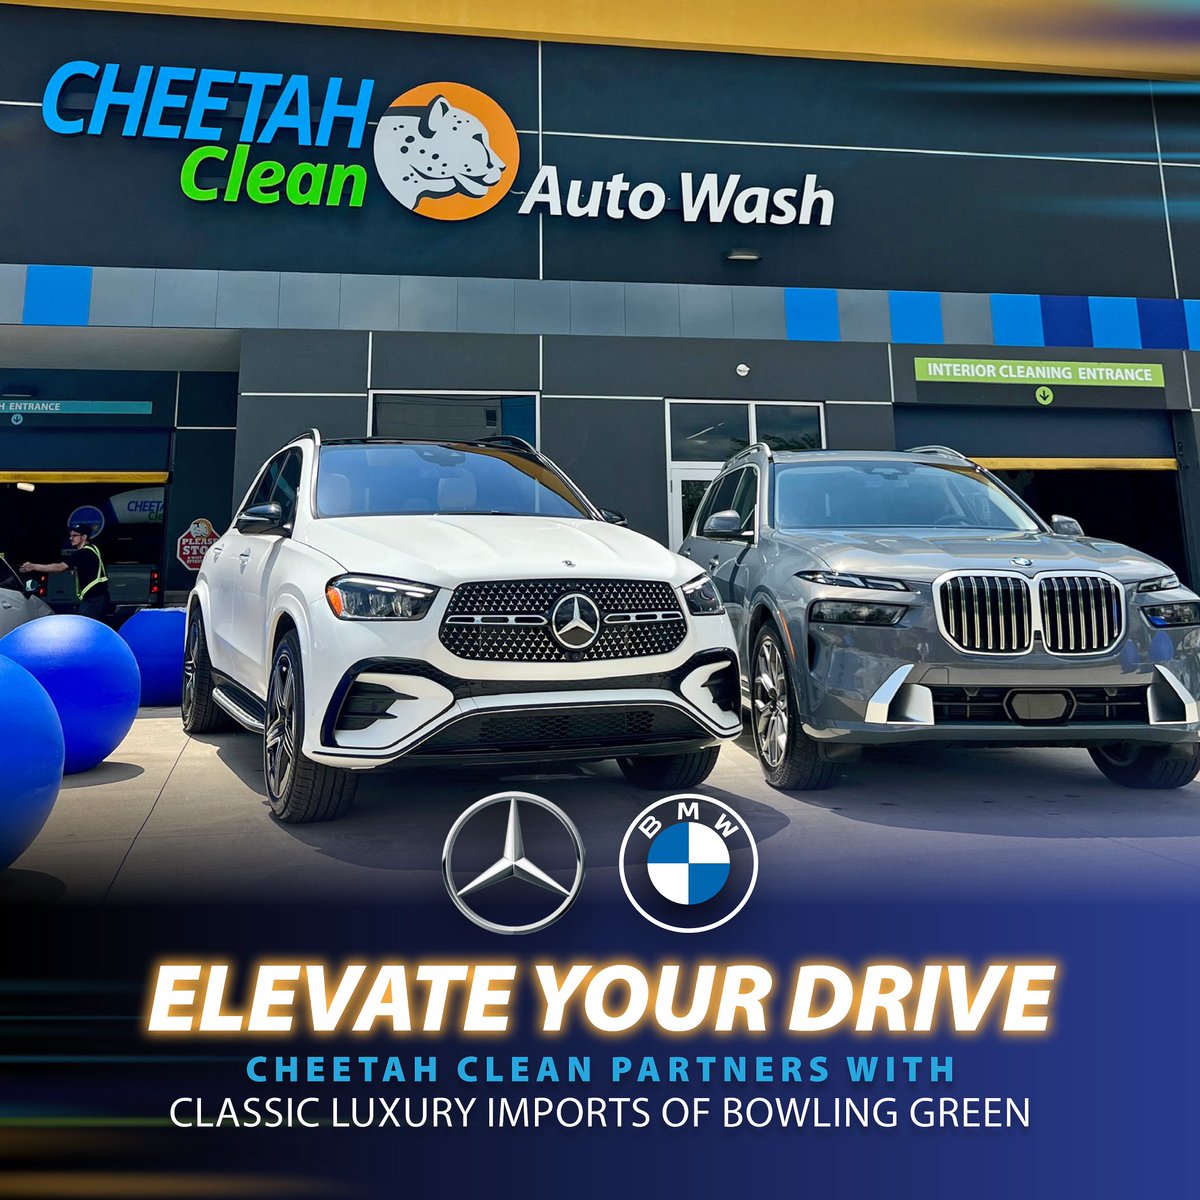 Elevate your drive with Cheetah Clean, BMW, and Mercedes of Bowling Green!🔥🐆

With every service completed by Classic Luxury Imports of Bowling Green, you will receive a complimentary King Extreme Wash and Interior Cleaning, valued at $43, at our Cave Mill location!